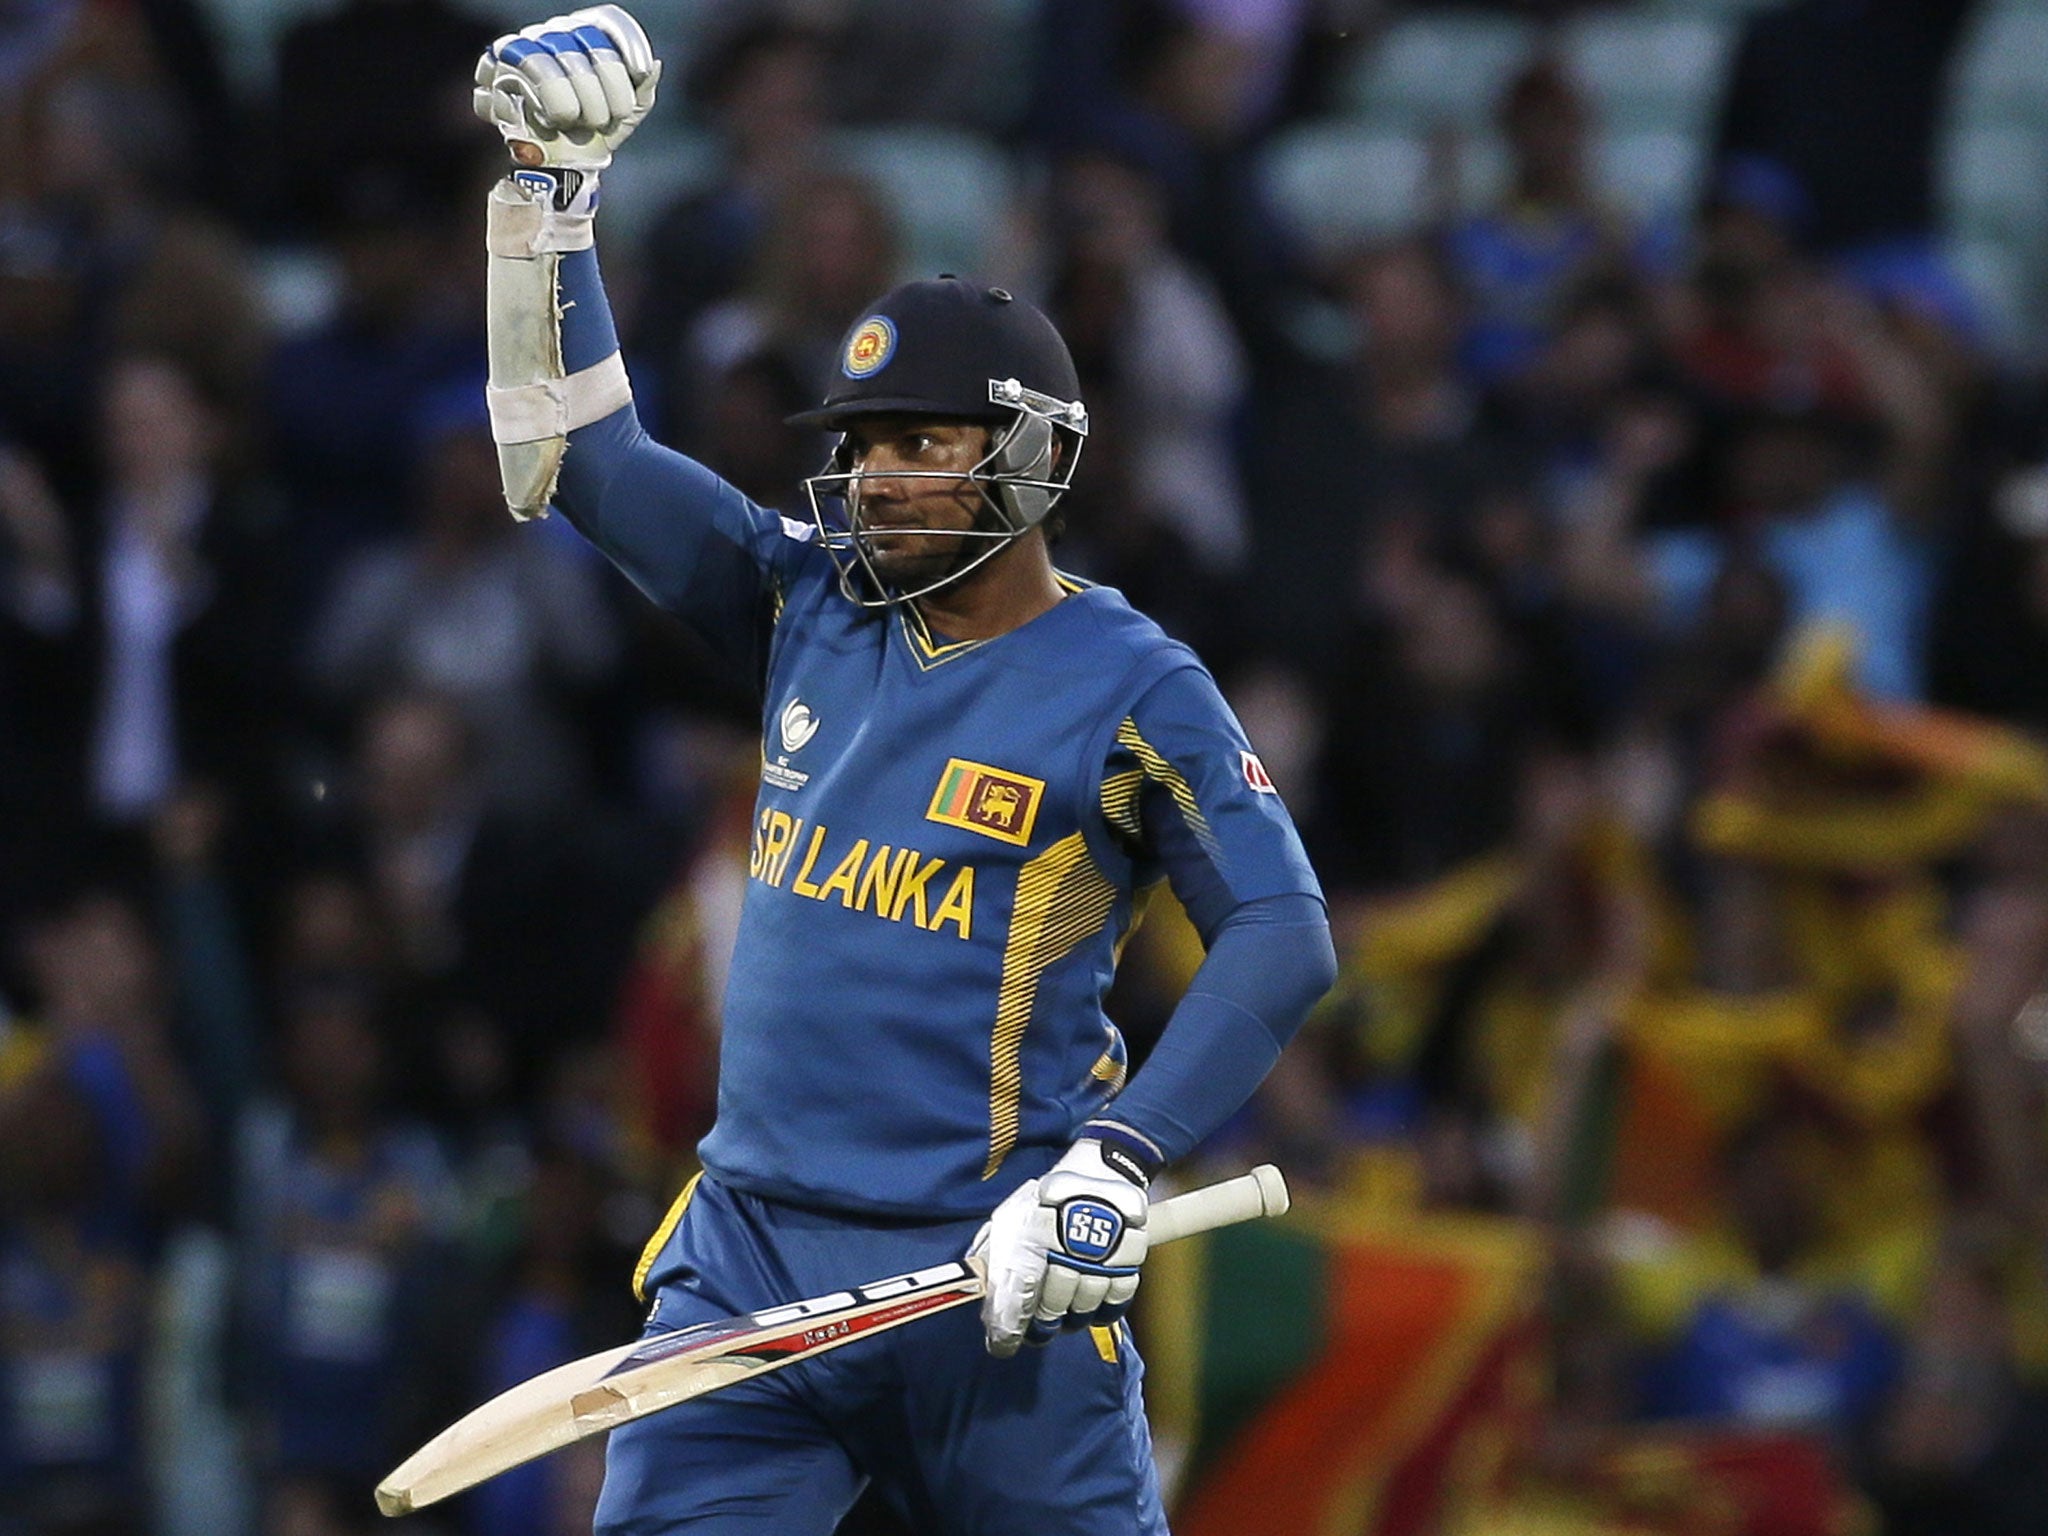 Sri Lanka's Kumar Sangakkara punches the air after he hit the winning runs to defeat England in  their ICC Champions Trophy cricket match at the Oval cricket ground in London